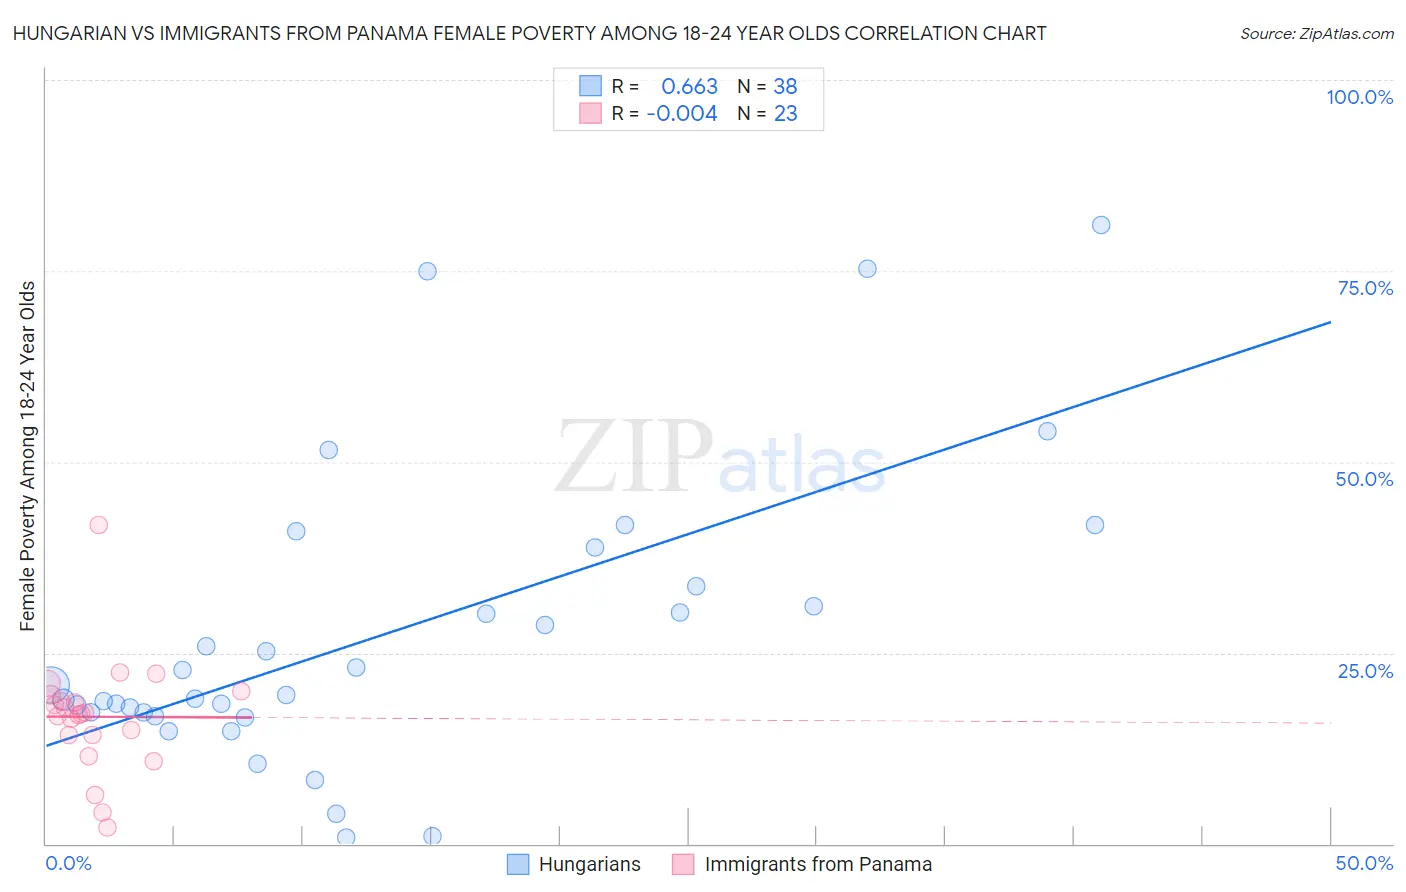 Hungarian vs Immigrants from Panama Female Poverty Among 18-24 Year Olds